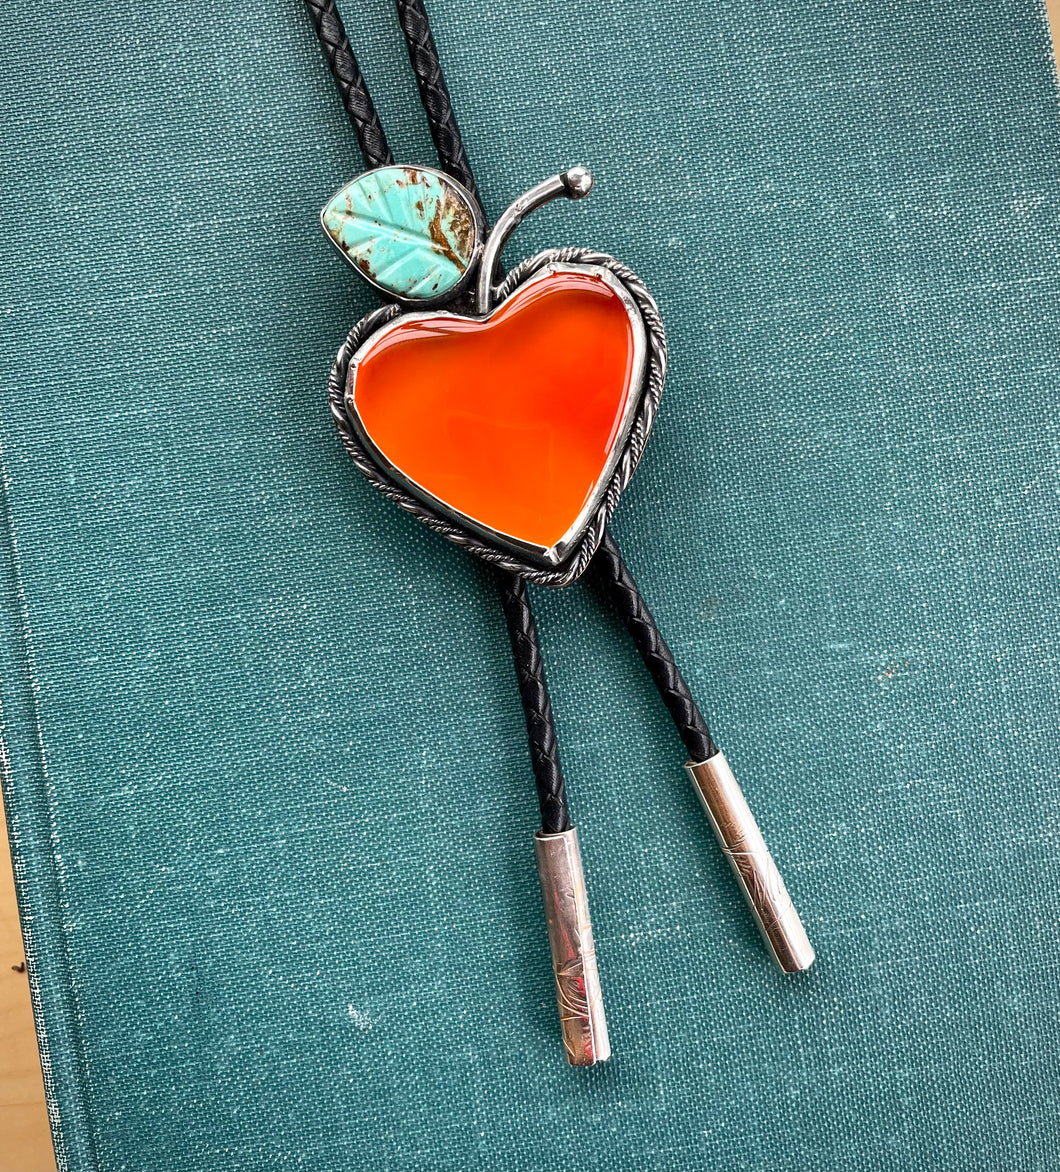 100% of Sale to OPERATION OLIVE BRANCH - Beautiful Peach Bolo Tie in Carnelian and Turquoise with Sterling Accents